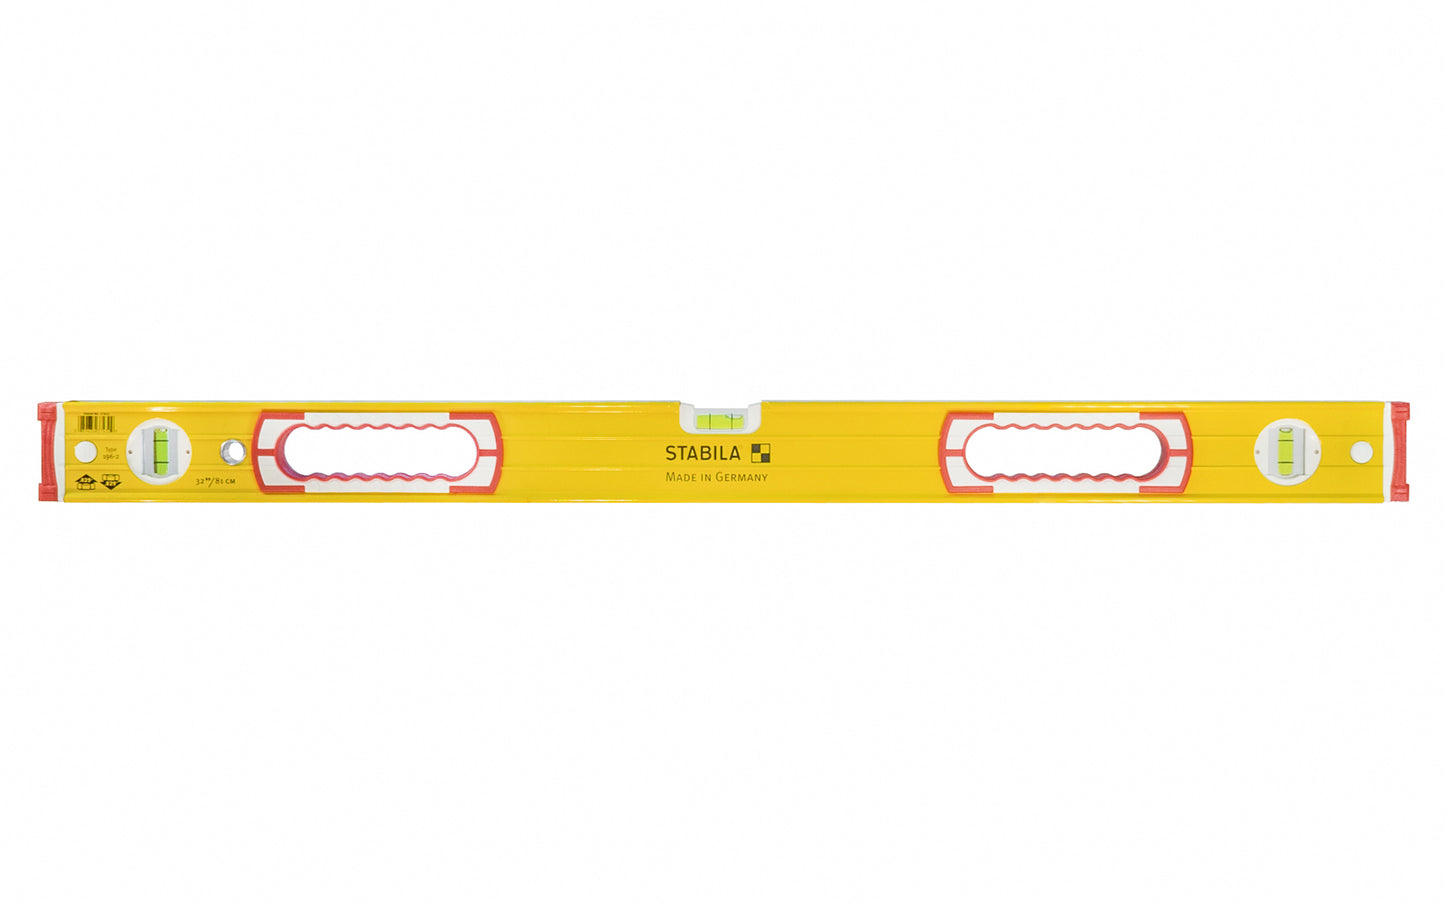 Stabila 32" (81 cm) Heavy Duty Level ~ Type 196-2 - No. 37432 ~ Made in Germany - This level in particularly is useful for building installation & for contractors, since it's 32" size fits door headers, window sills, & thresholds